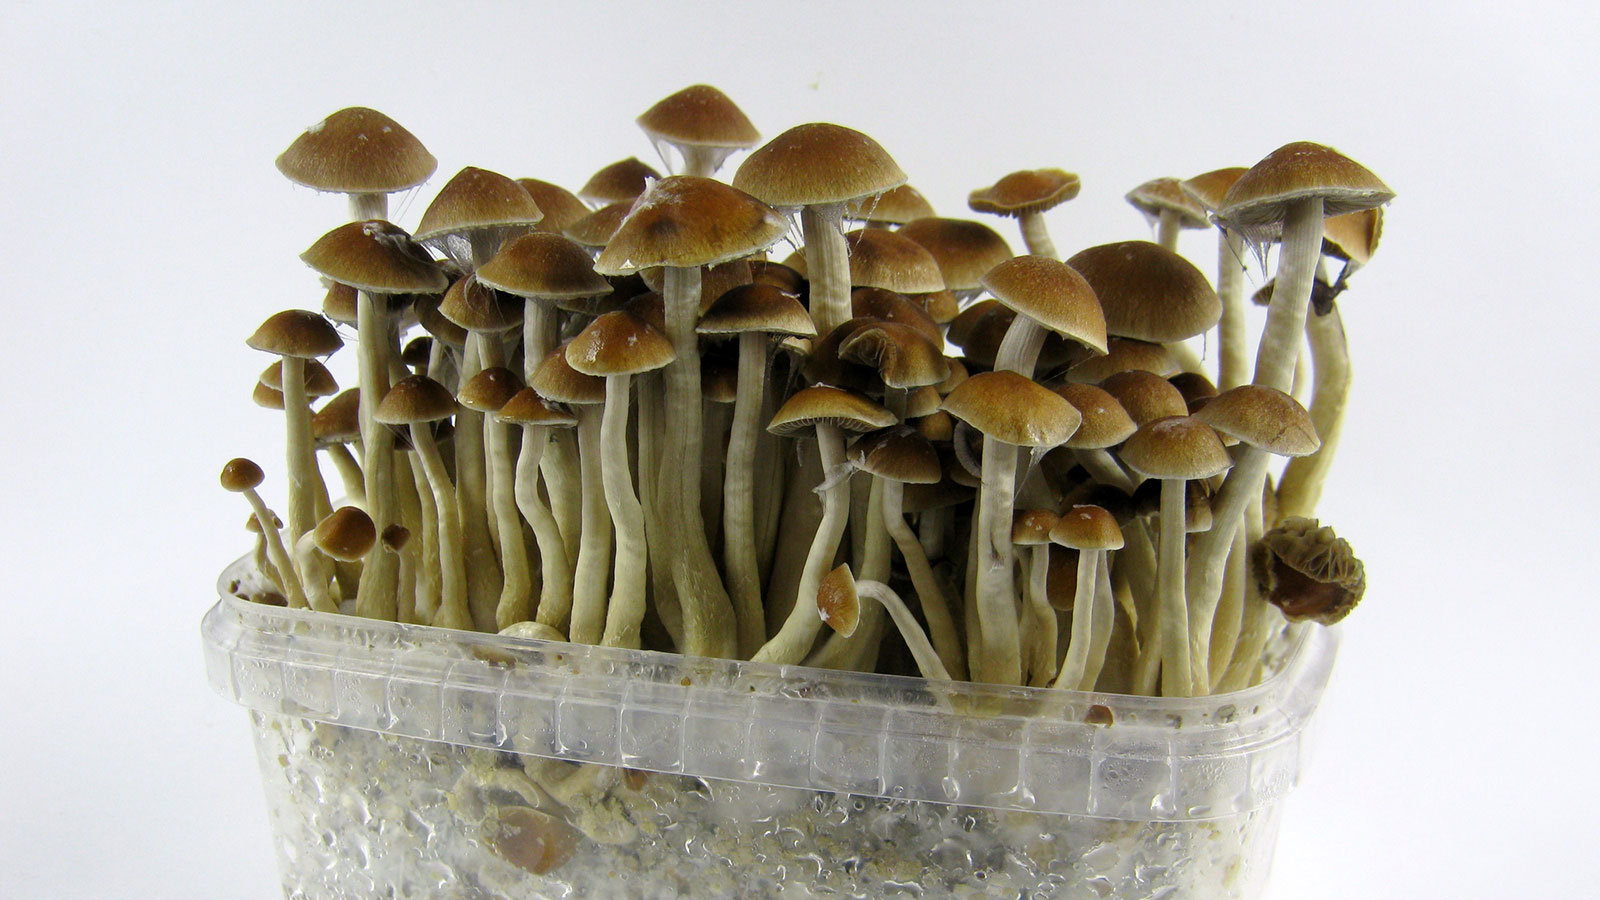 Fungal Freight: Timely Shroom Service